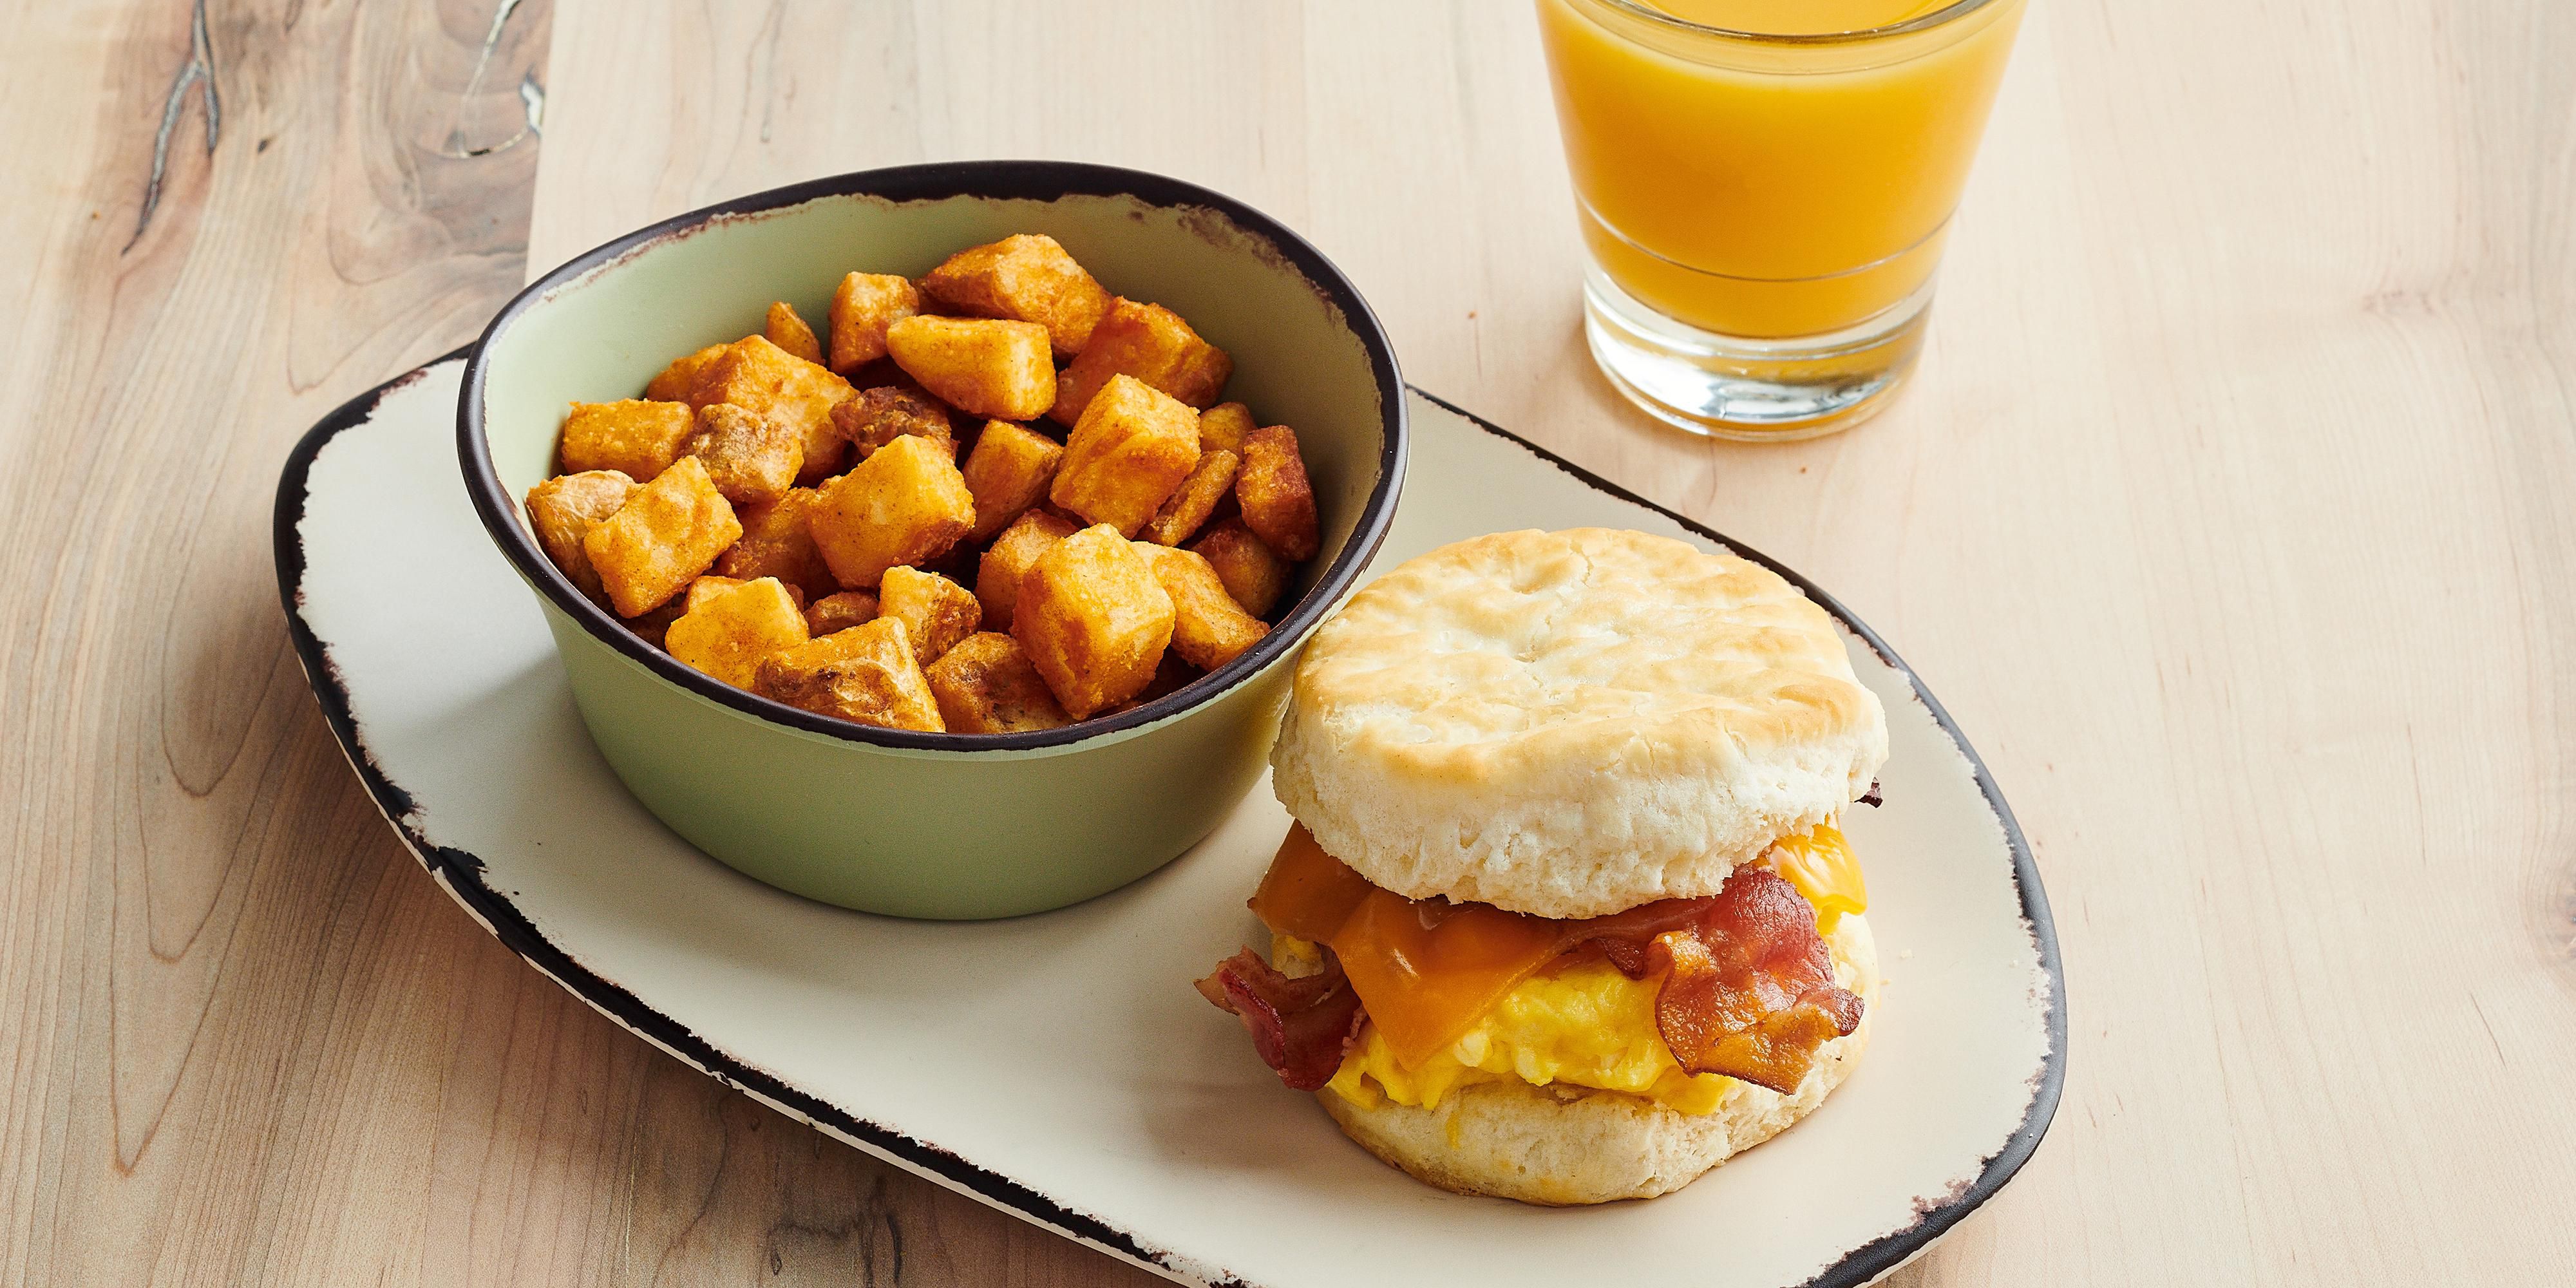 enjoy a Bacon Breakfast Sandwich from our On-site Restaurant